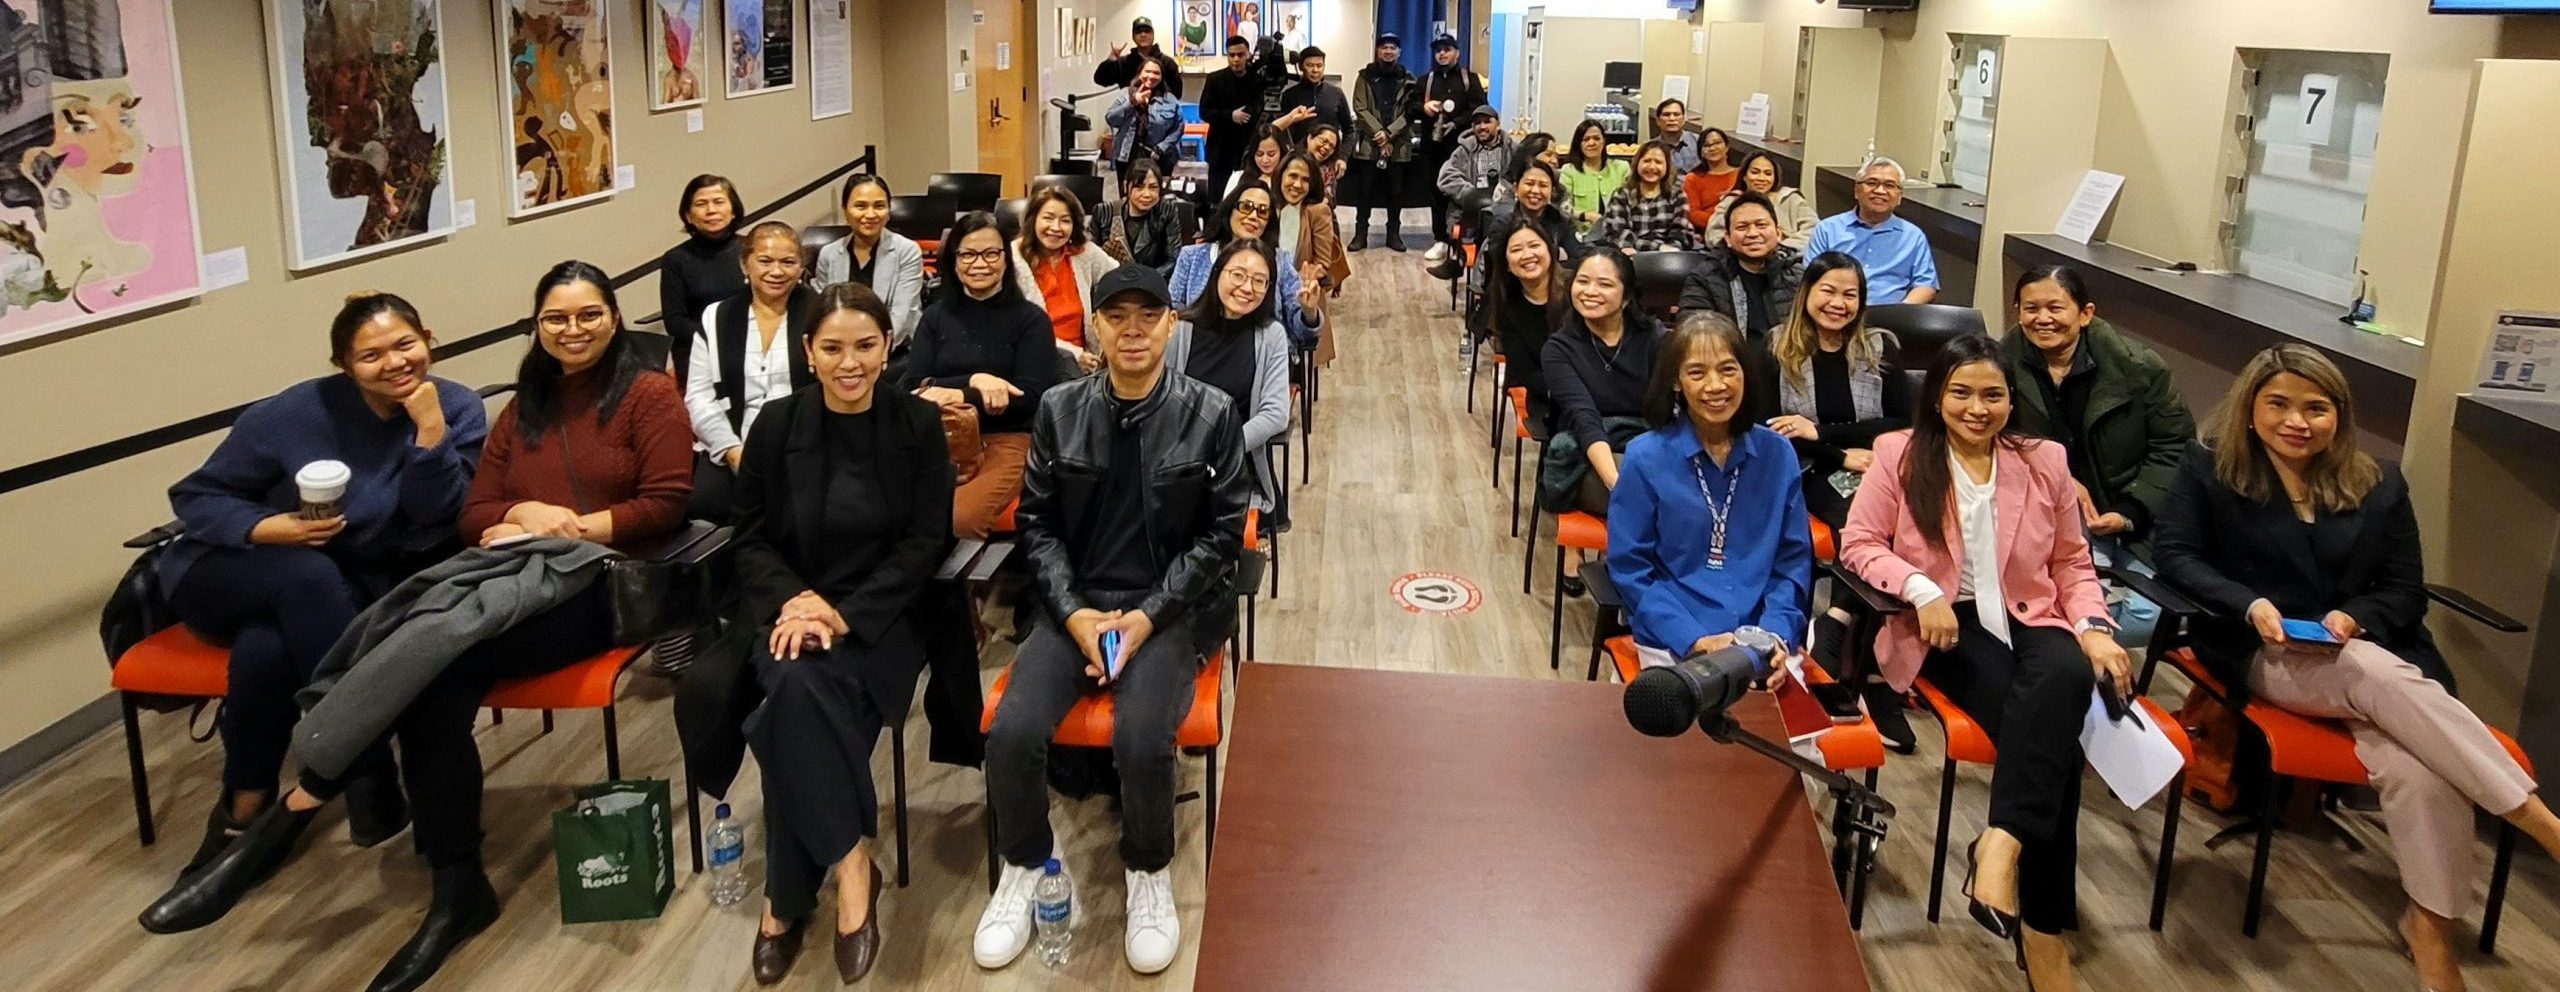 PH Consulate General in Vancouver Hosts Talk on Motherhood and Entrepreneurship